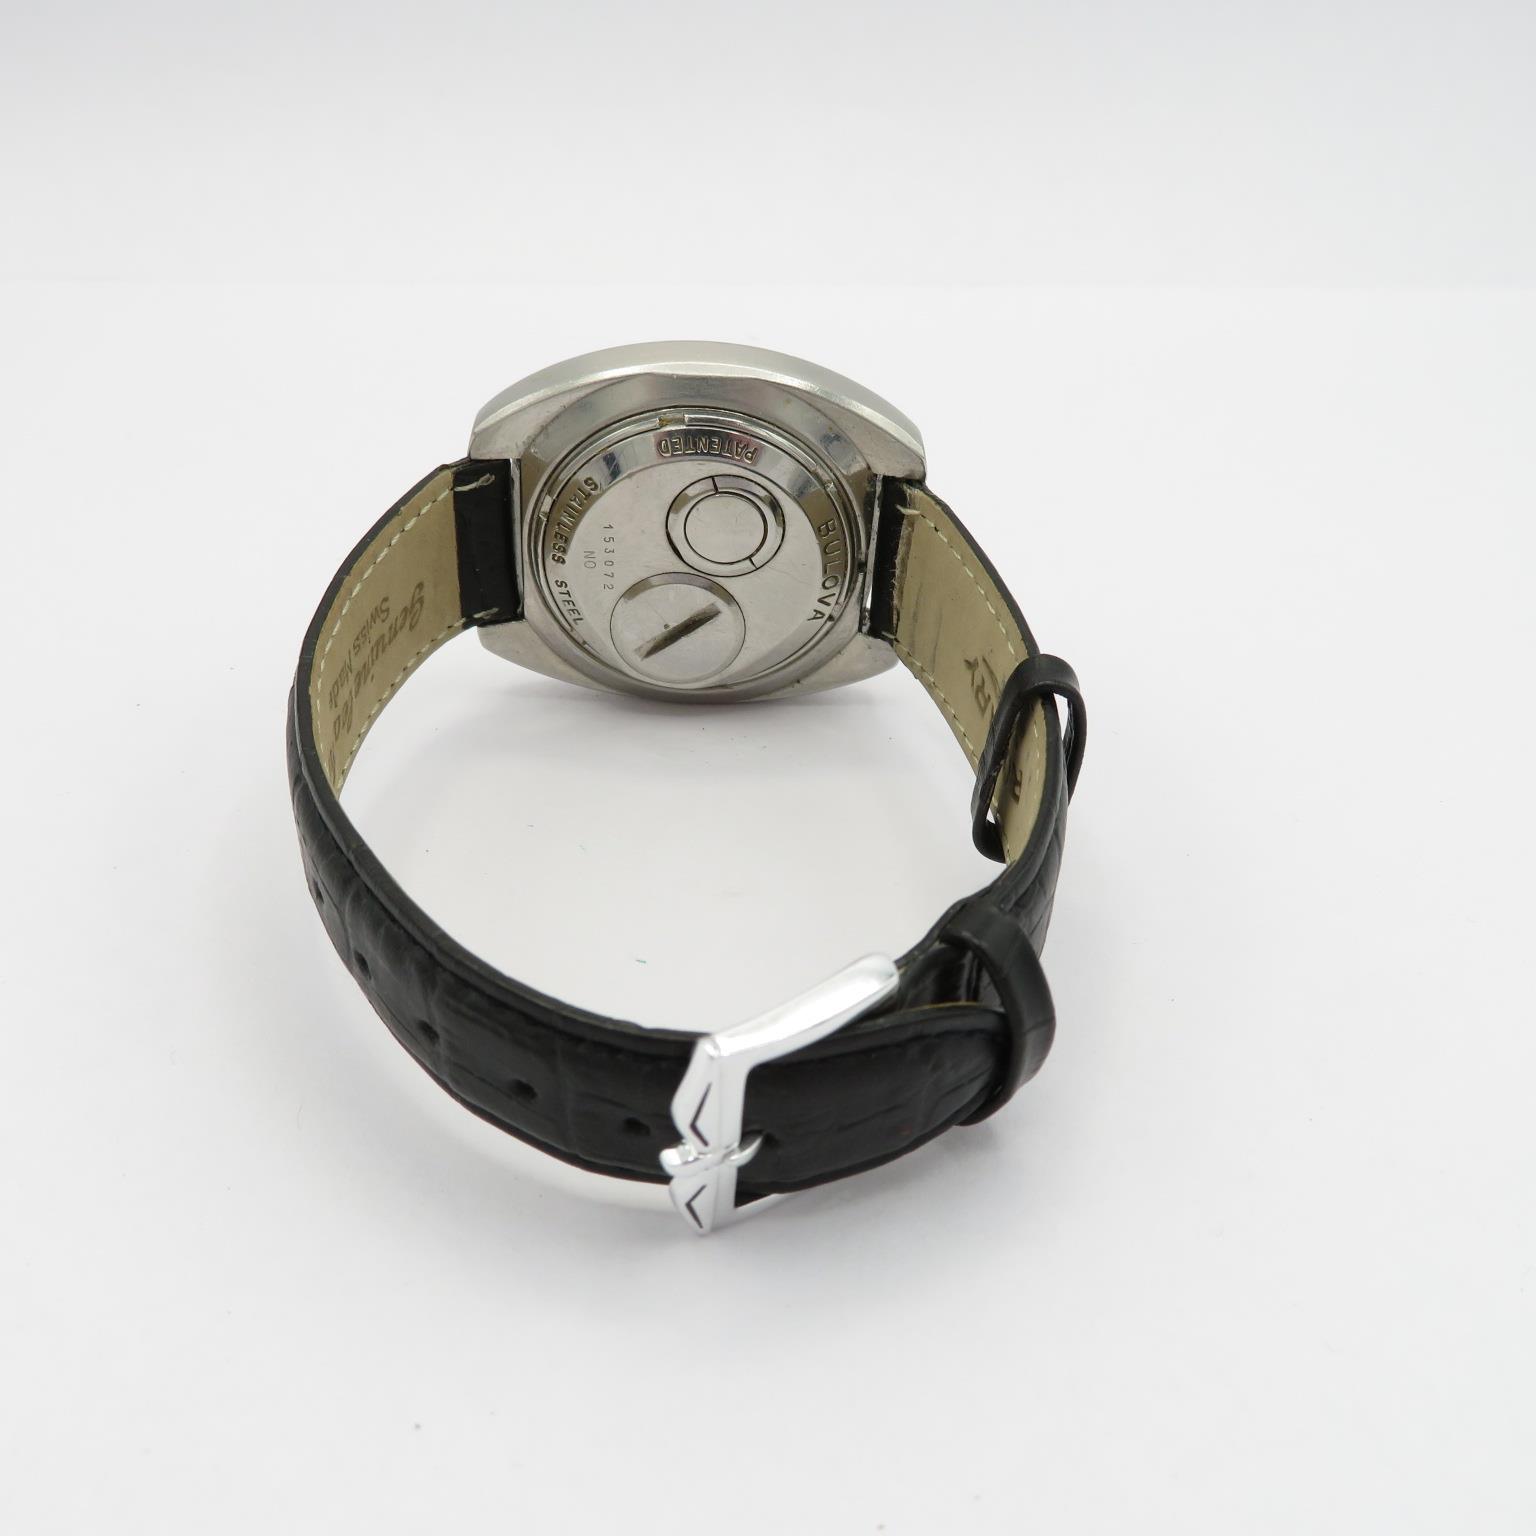 Bulova Accutron Spaceview 214 gents rare tuning fork wristwatch working at time of listing. Circa - Image 6 of 9